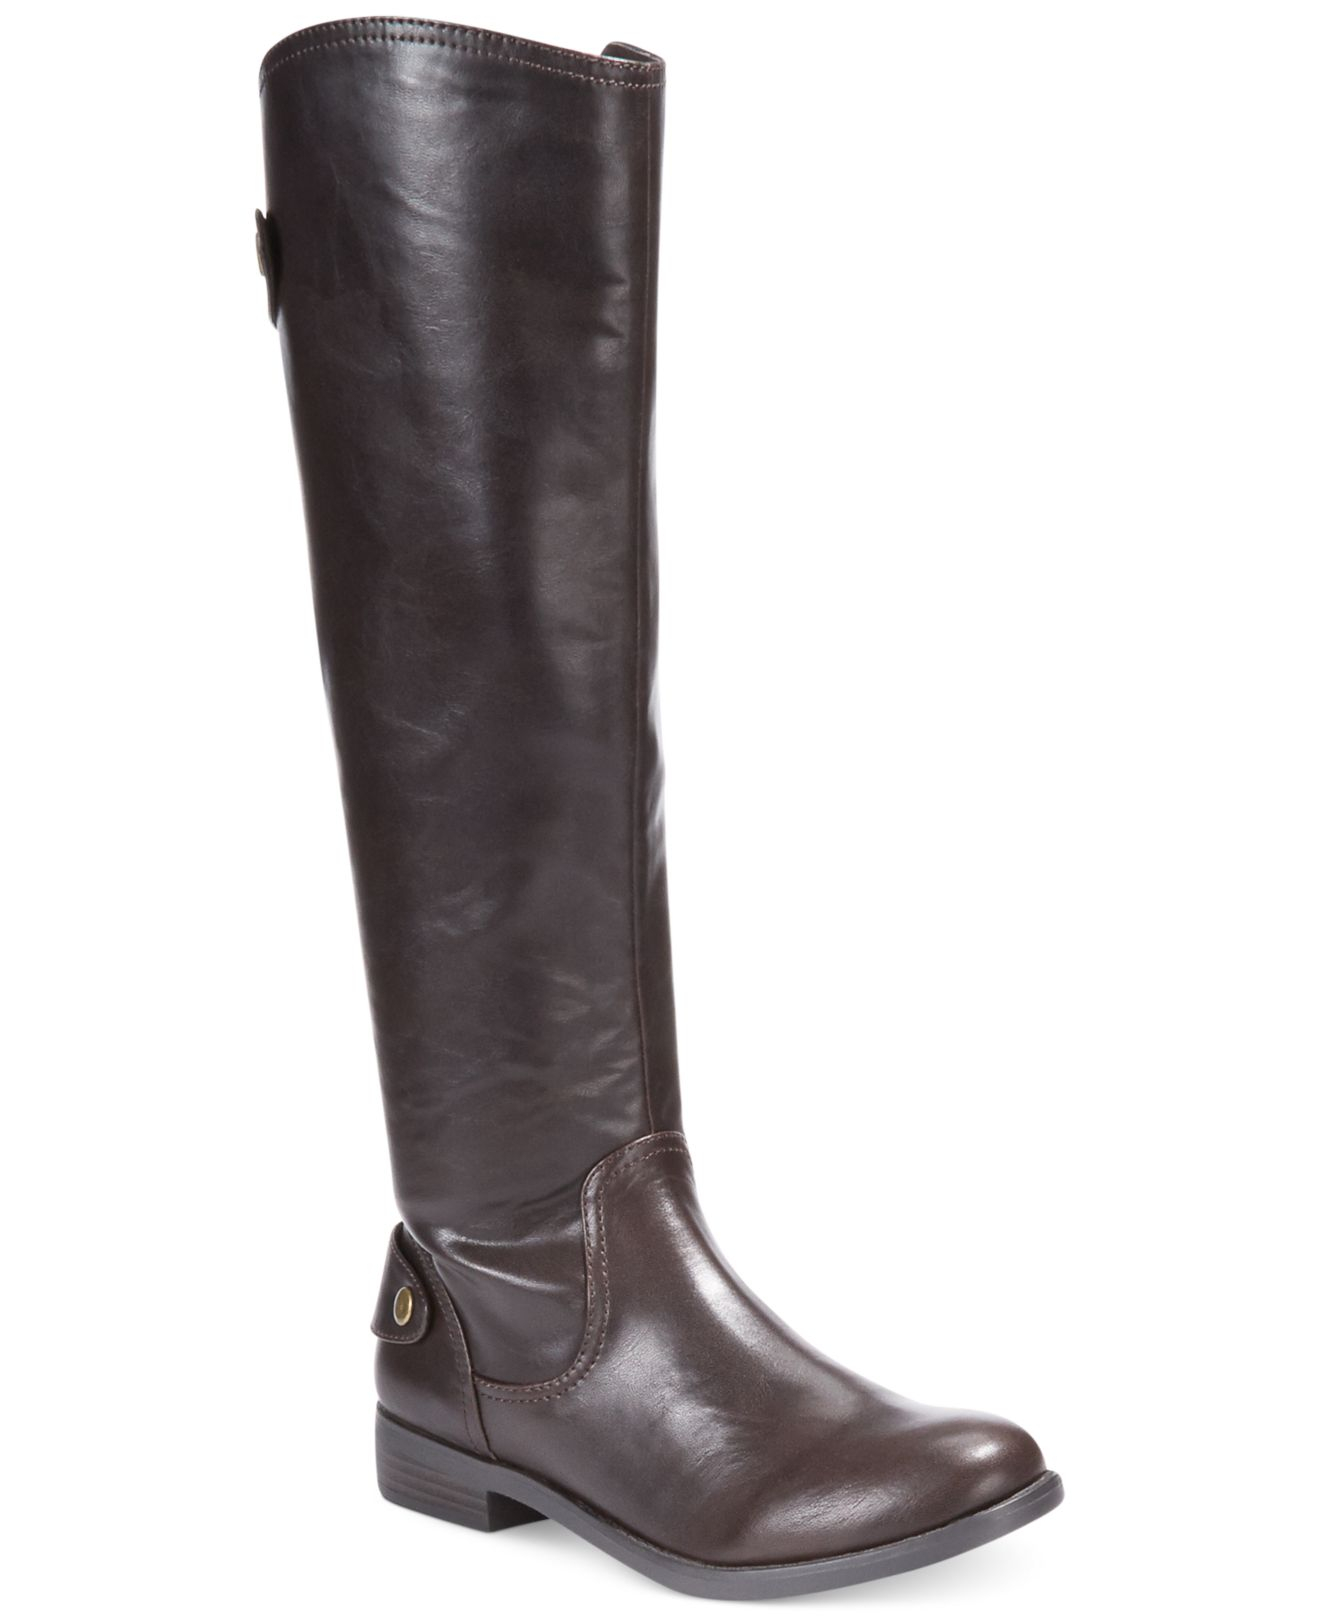 Lyst - Report Hildie Tall Shaft Riding Boots in Brown